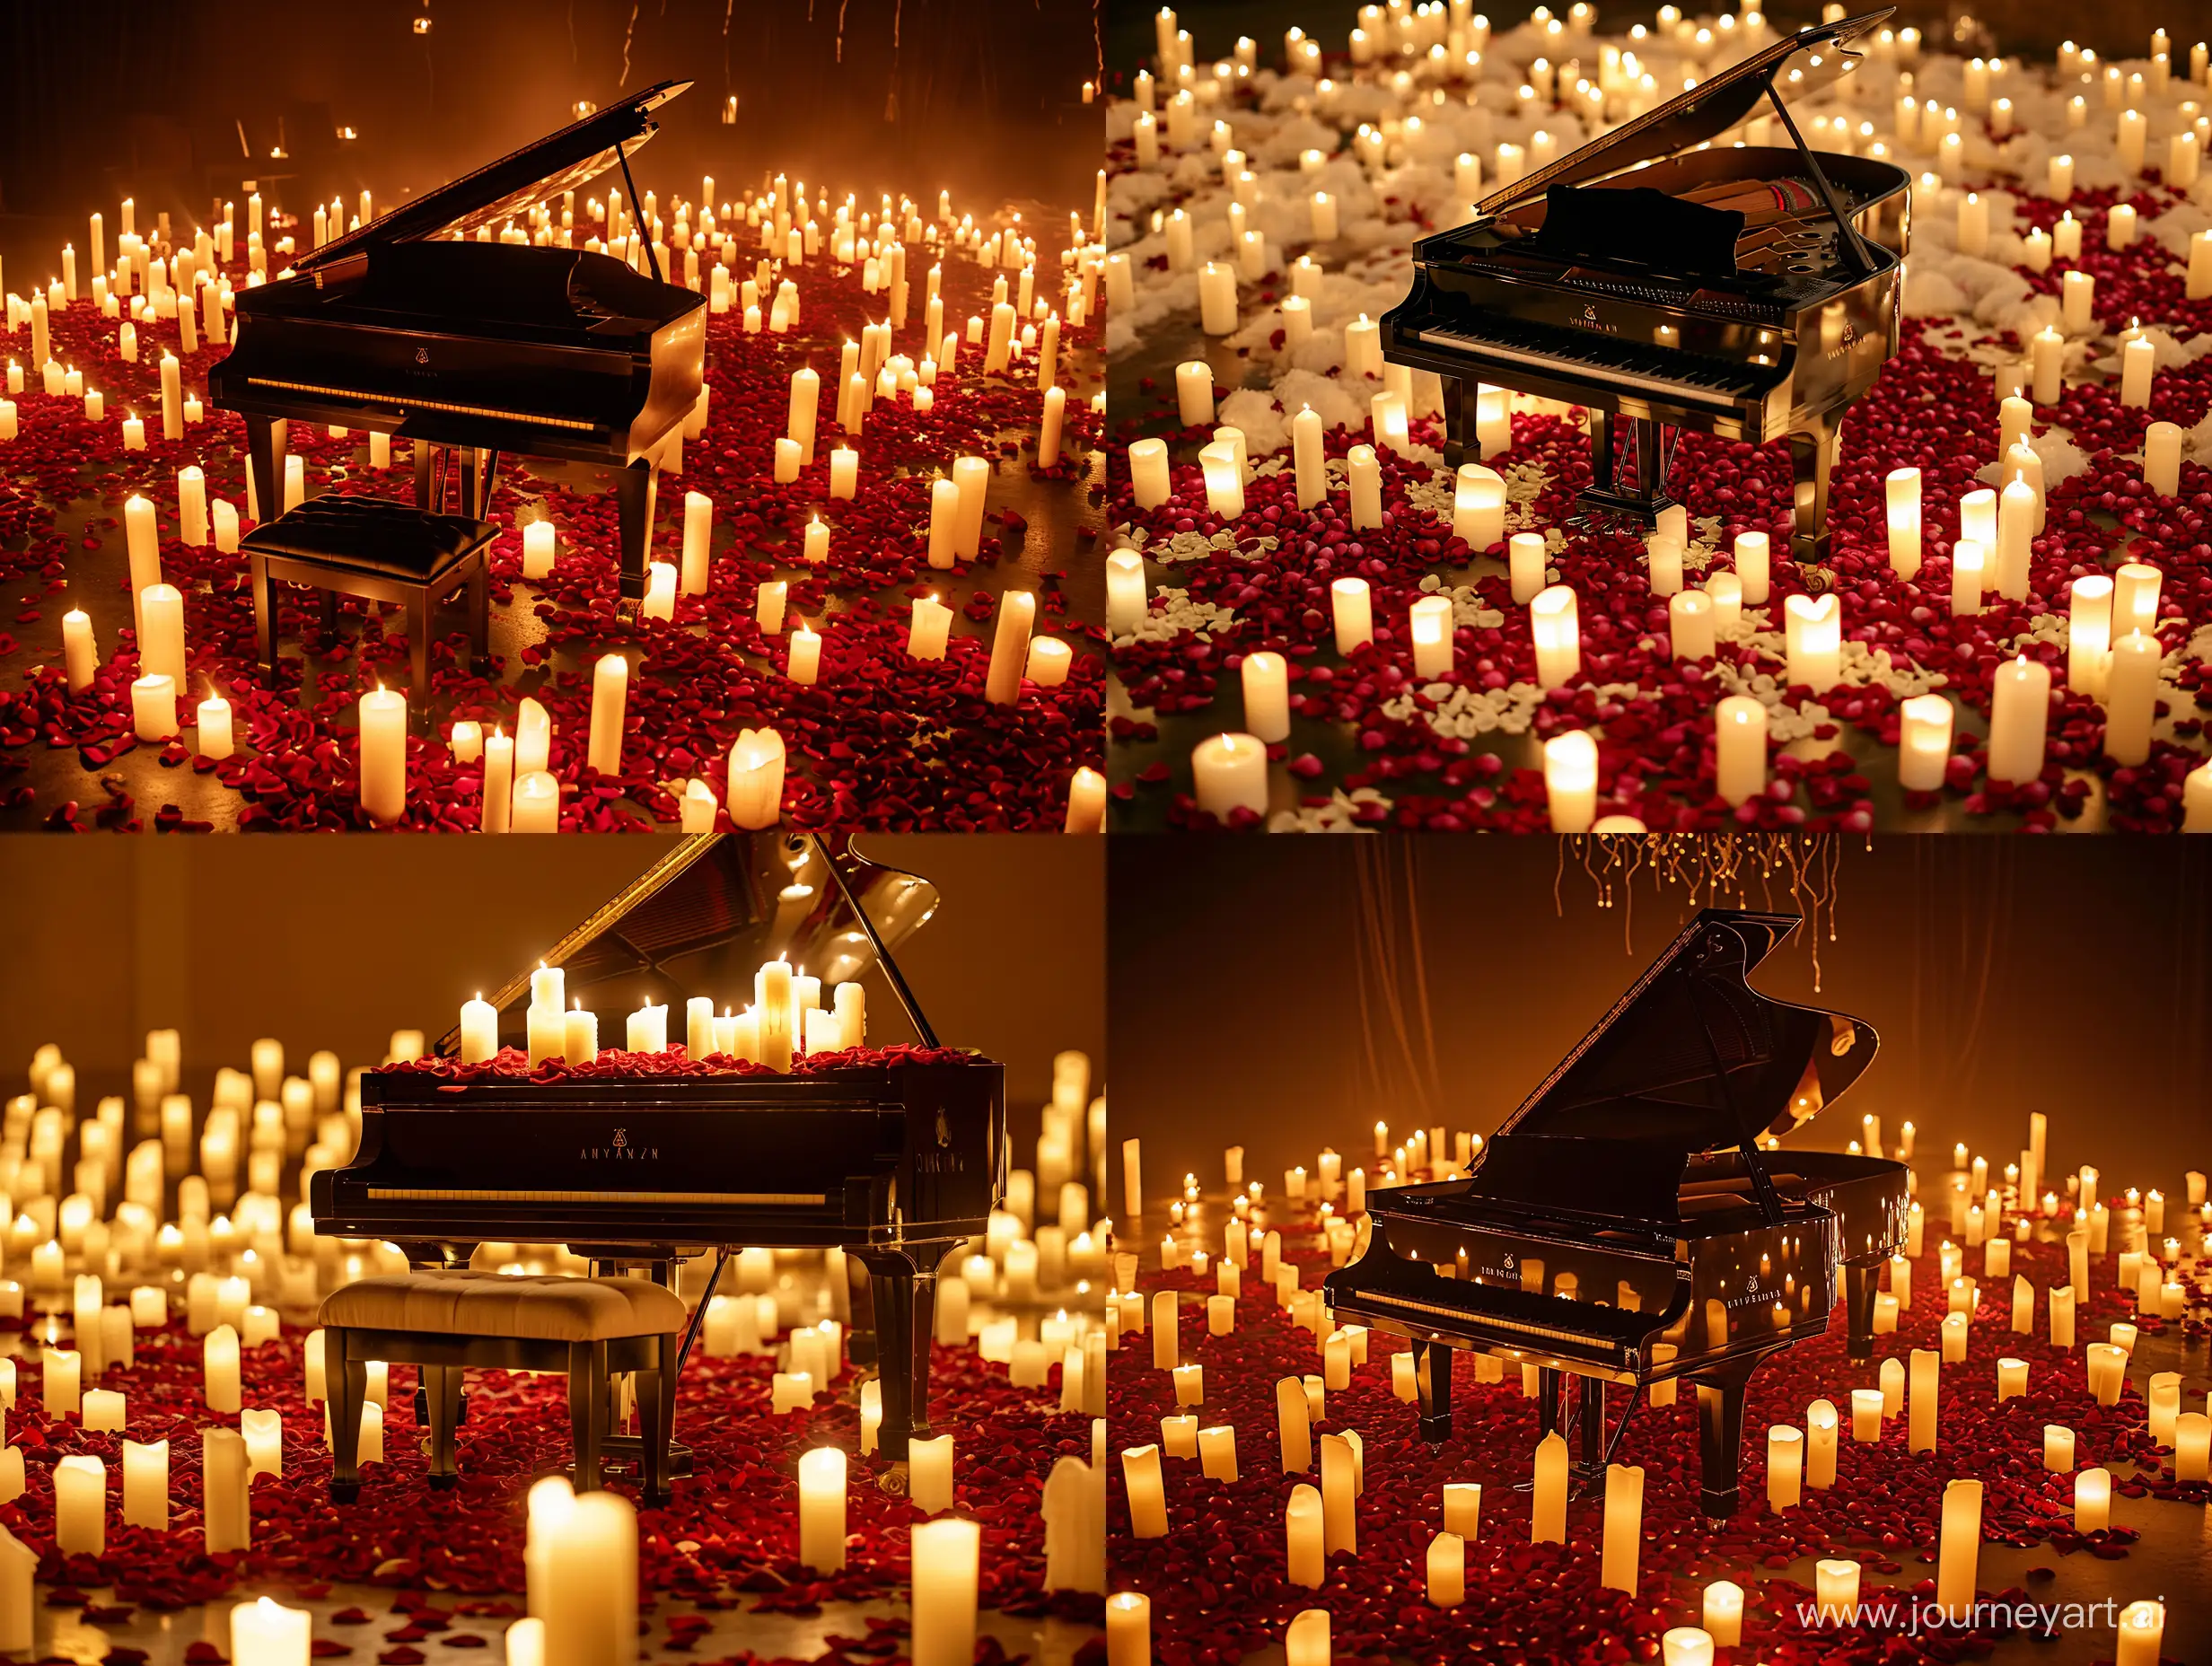 Elegant-Grand-Piano-Surrounded-by-a-Sea-of-Candles-and-Rose-Petals